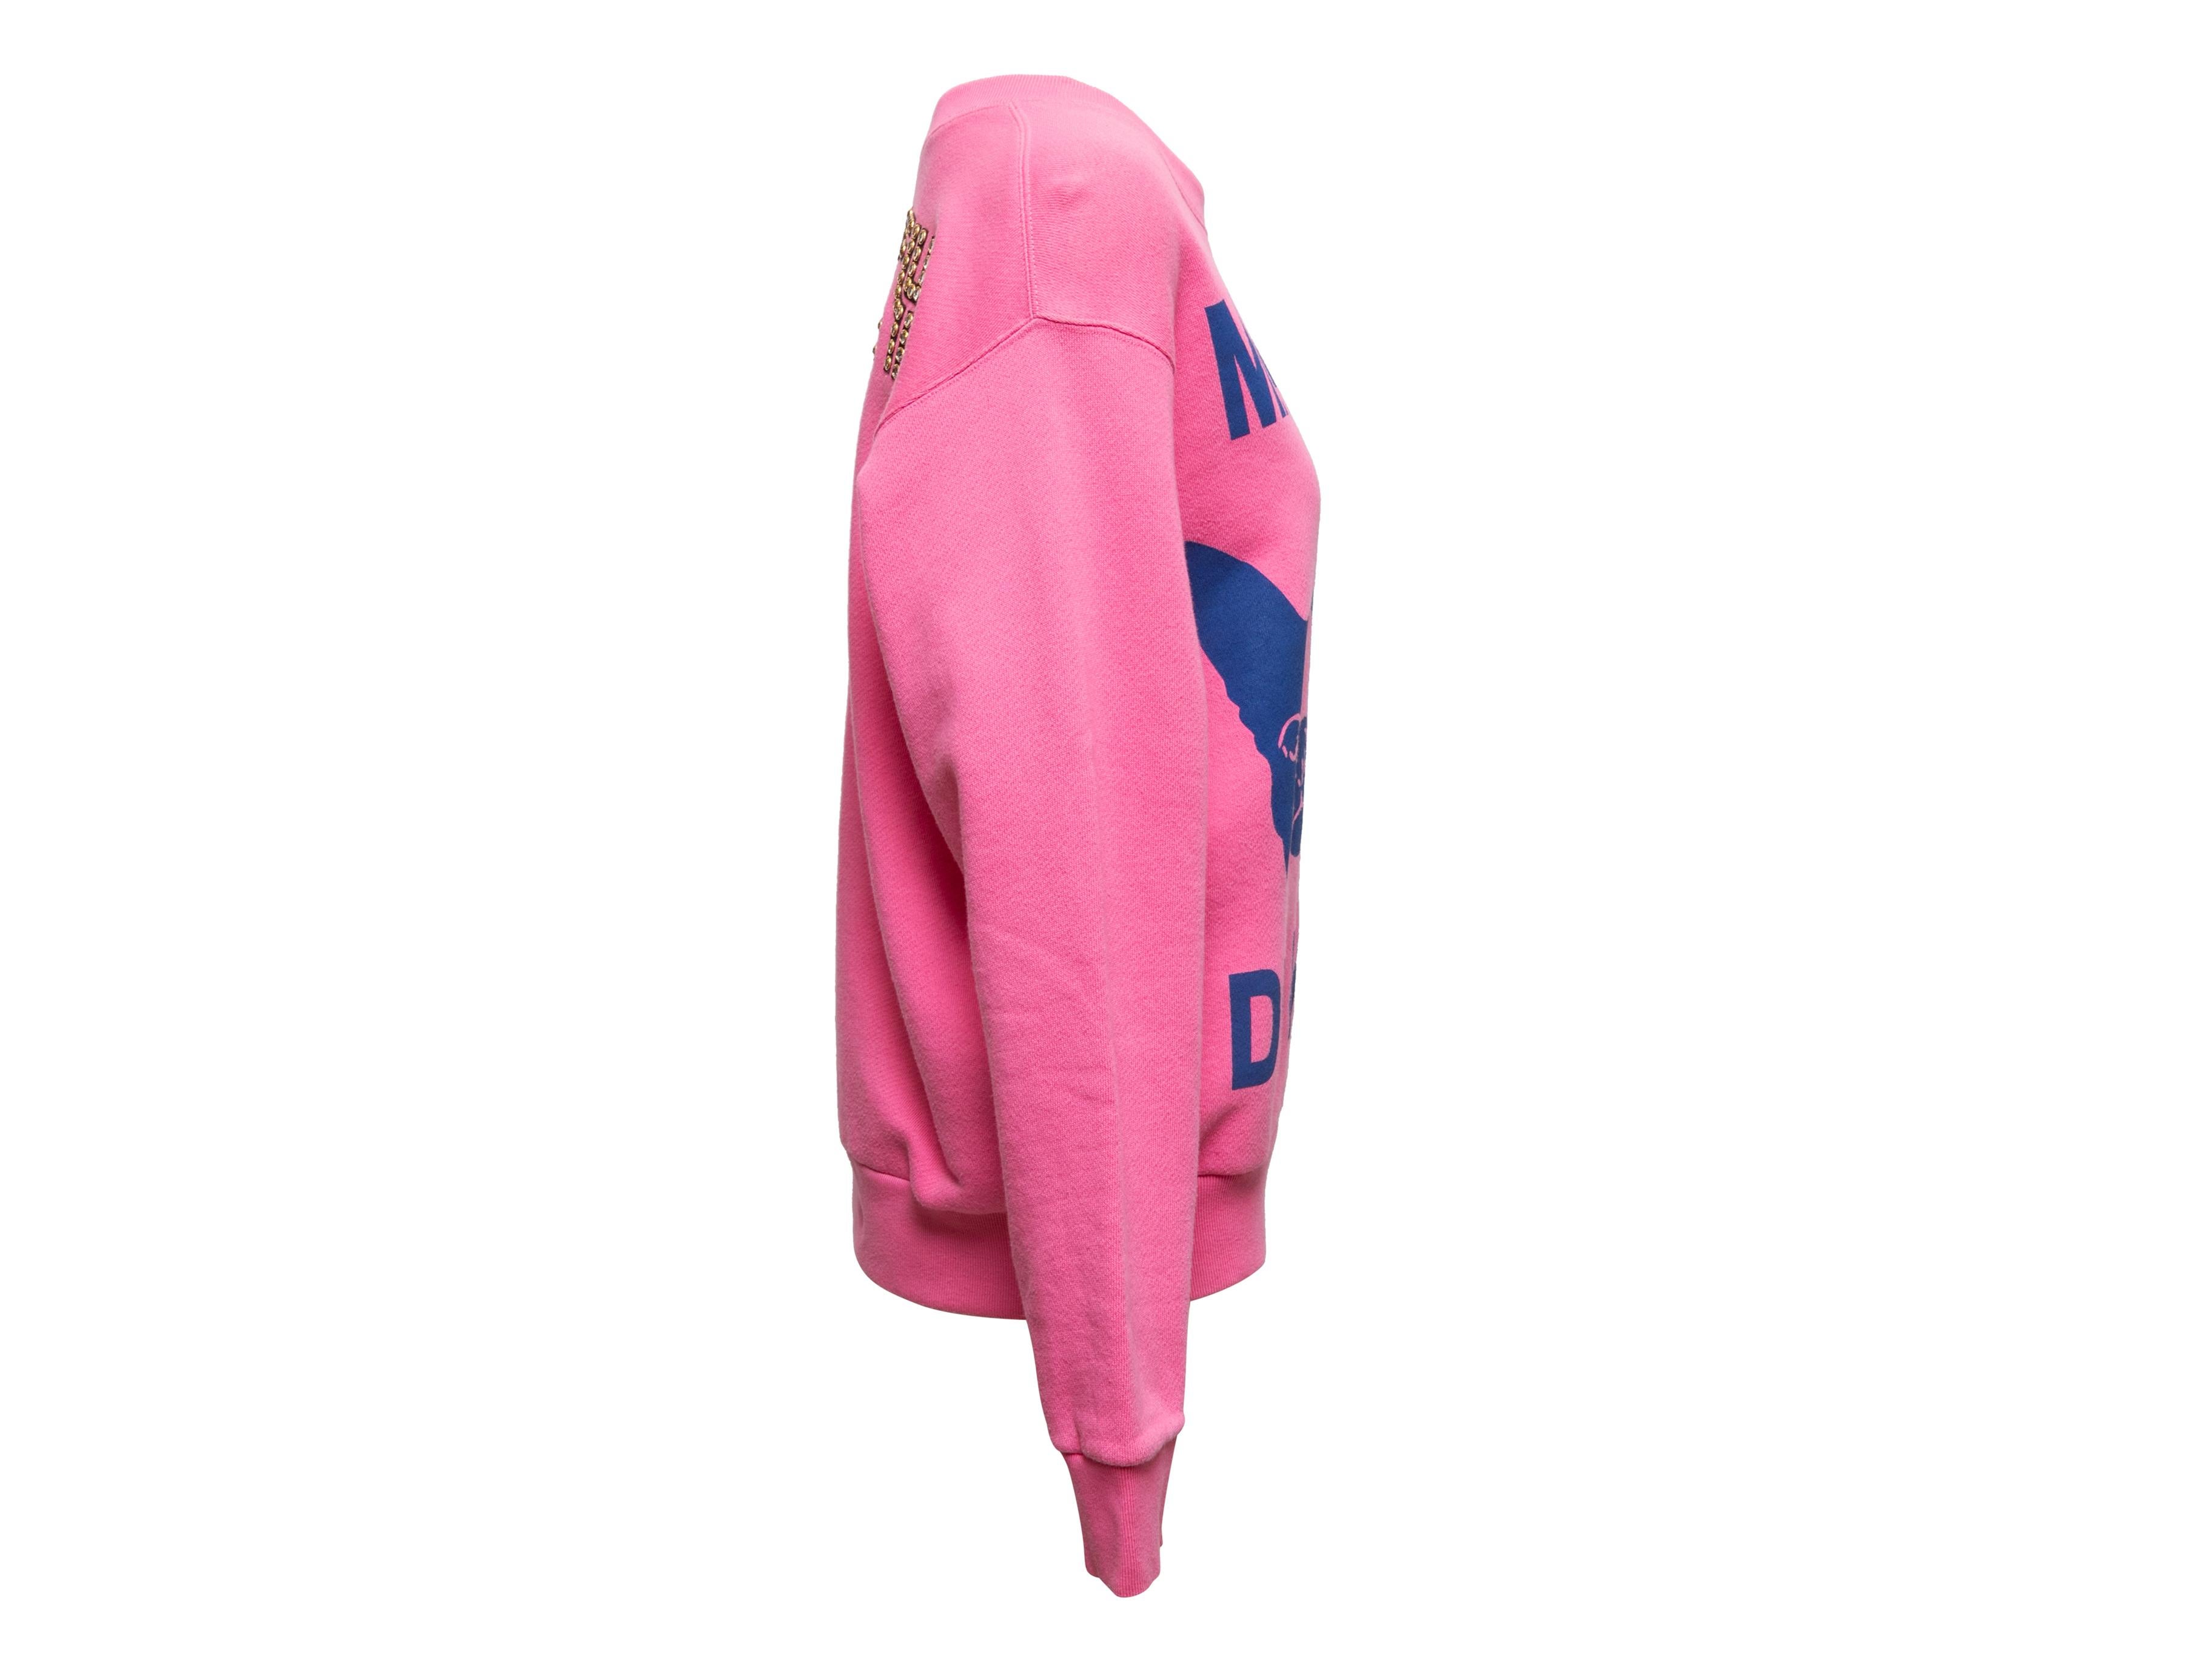 Pink and navy Maison De L'Amour dog print crew neck sweatshirt by Gucci. Rhinestone embellishments at back. 42